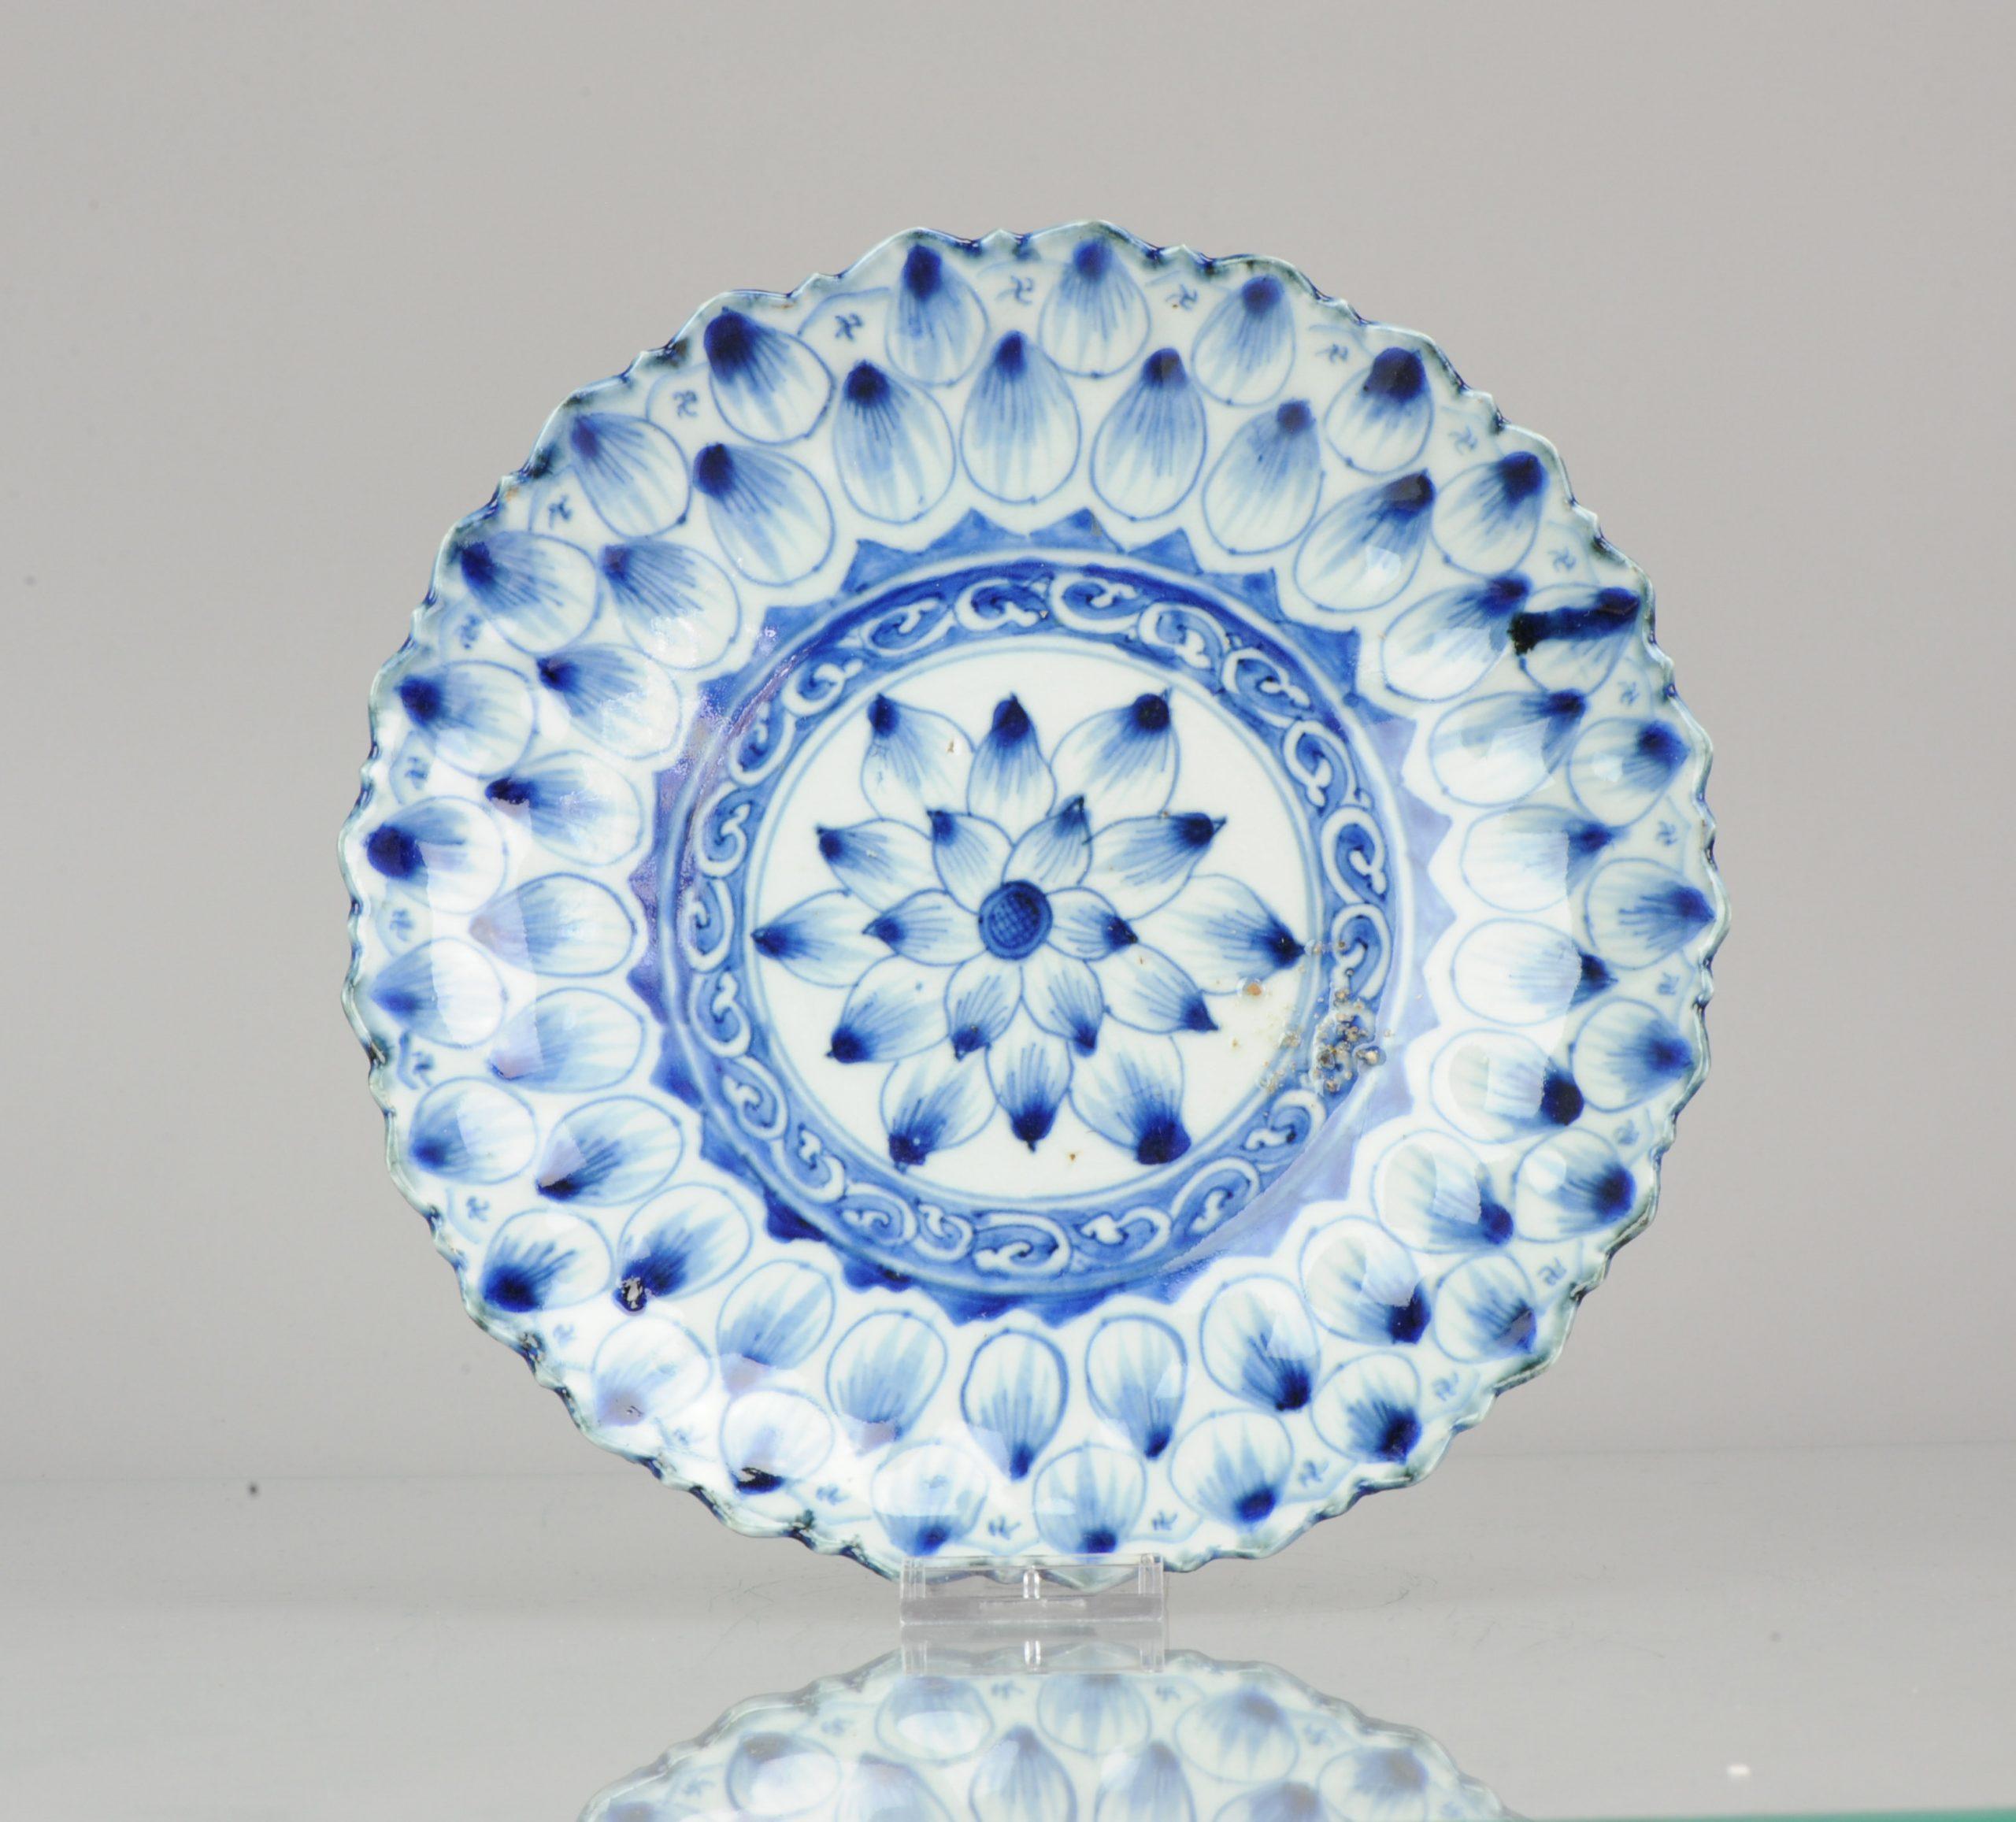 A very nice blue and white lotus shaped plate. With swastikas in the border. Chenghua marked.

Reference see:
Kyoto Shoin - Kosometsuke & MArchant - Ming porcelain for the Japanese MArkets

S. Marchant & Son: Ming Porcelain for the Japanese